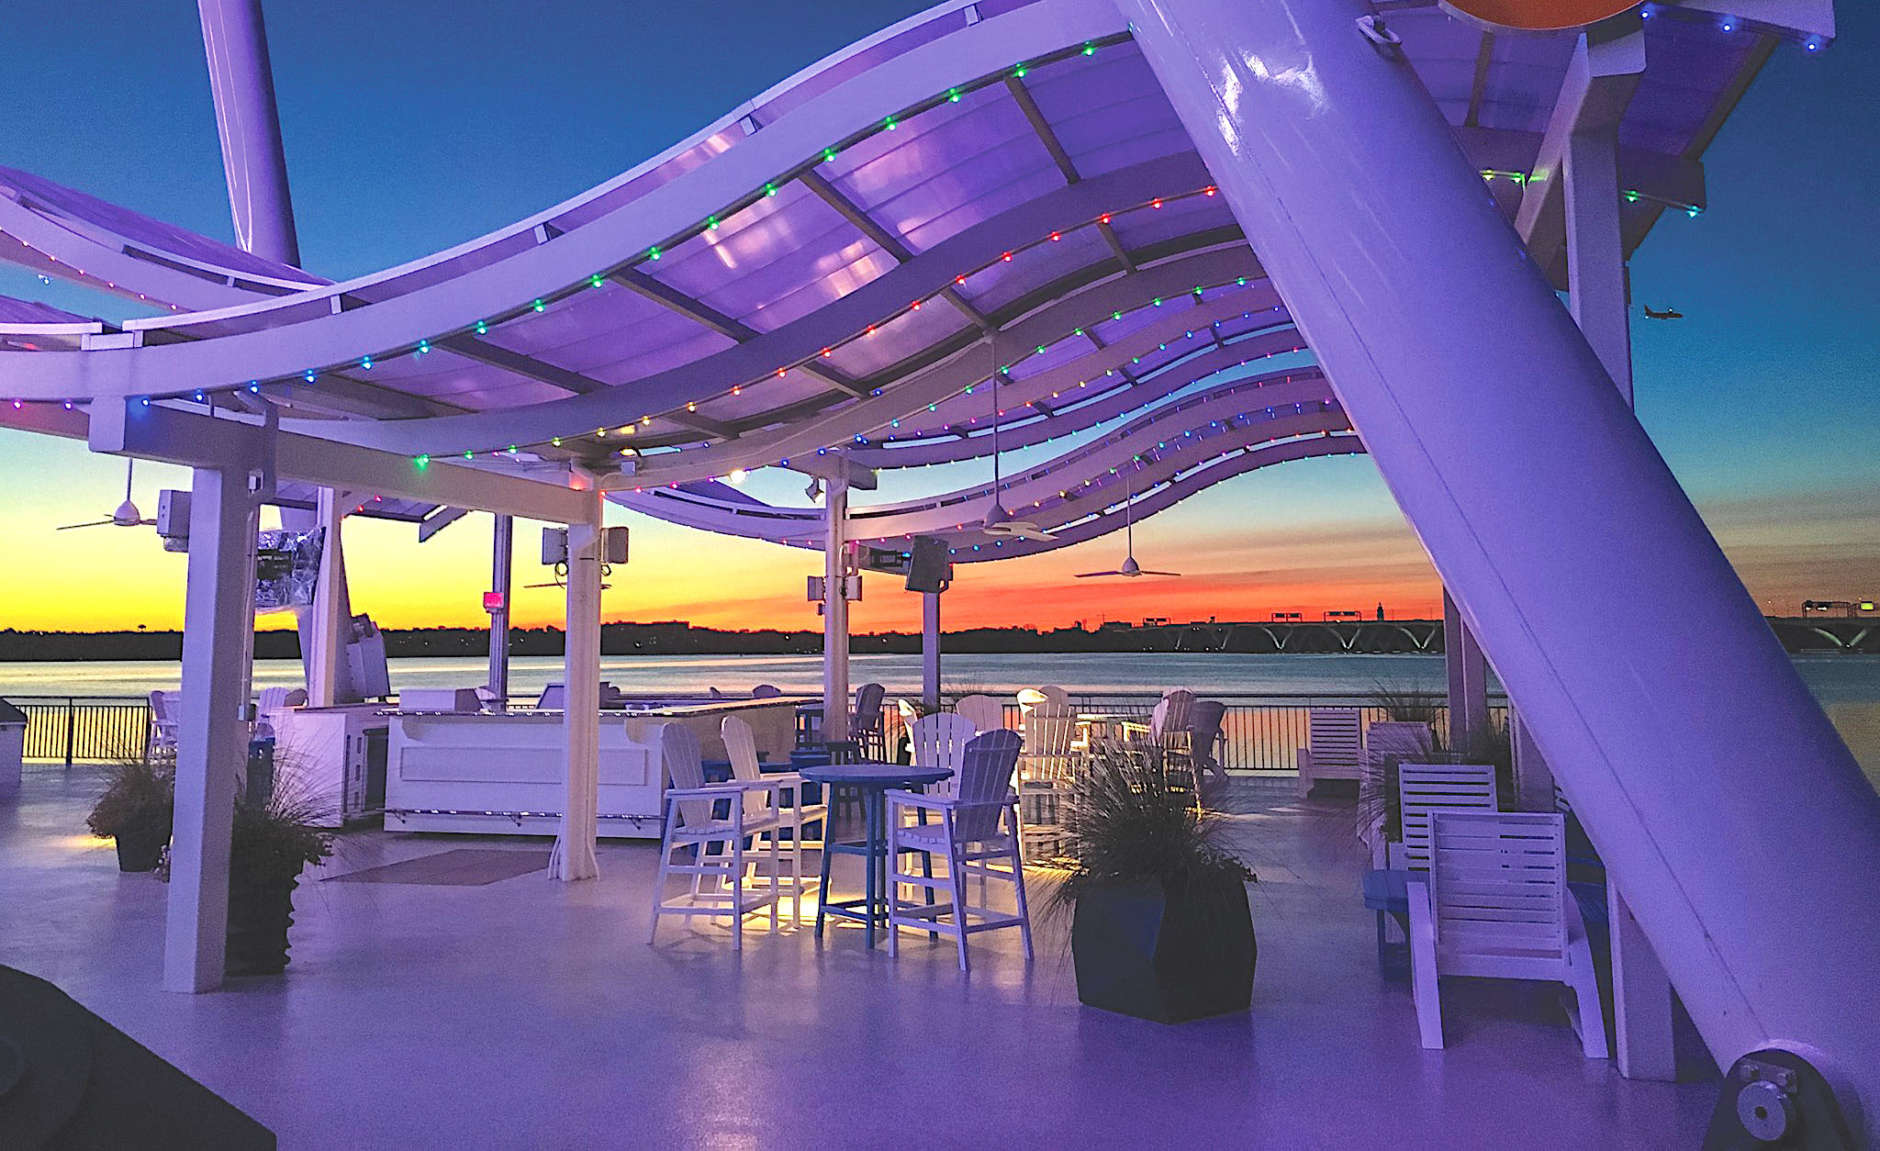 The Flight Deck outdoor lounge will serve wine, champagne, cocktails and light bites. (Courtesy National Harbor Capital Wheel)